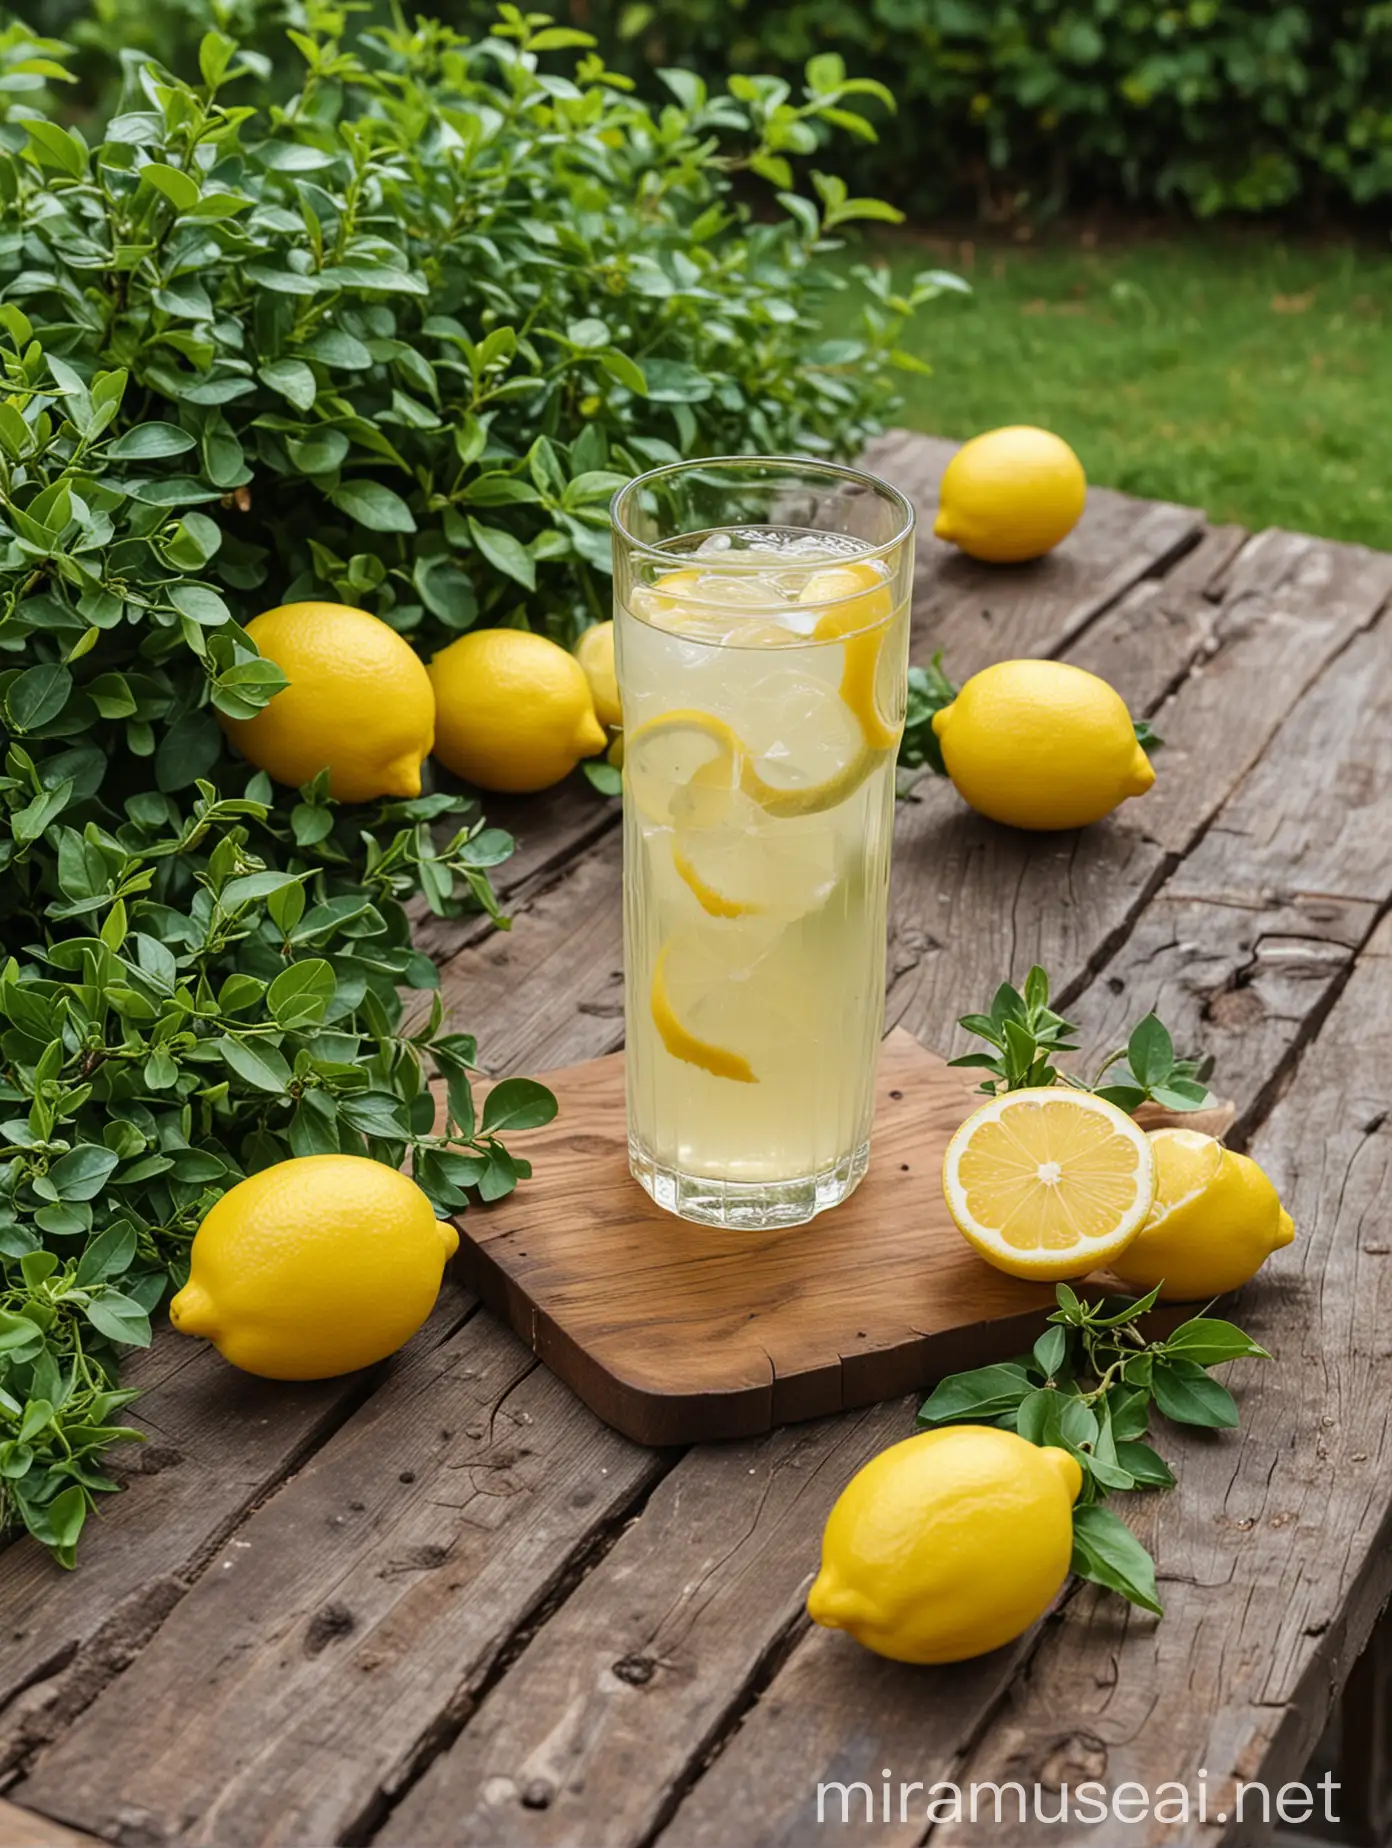 Outdoor Wooden Table with Beverages and Lemons Surrounded by Bright Green Plants